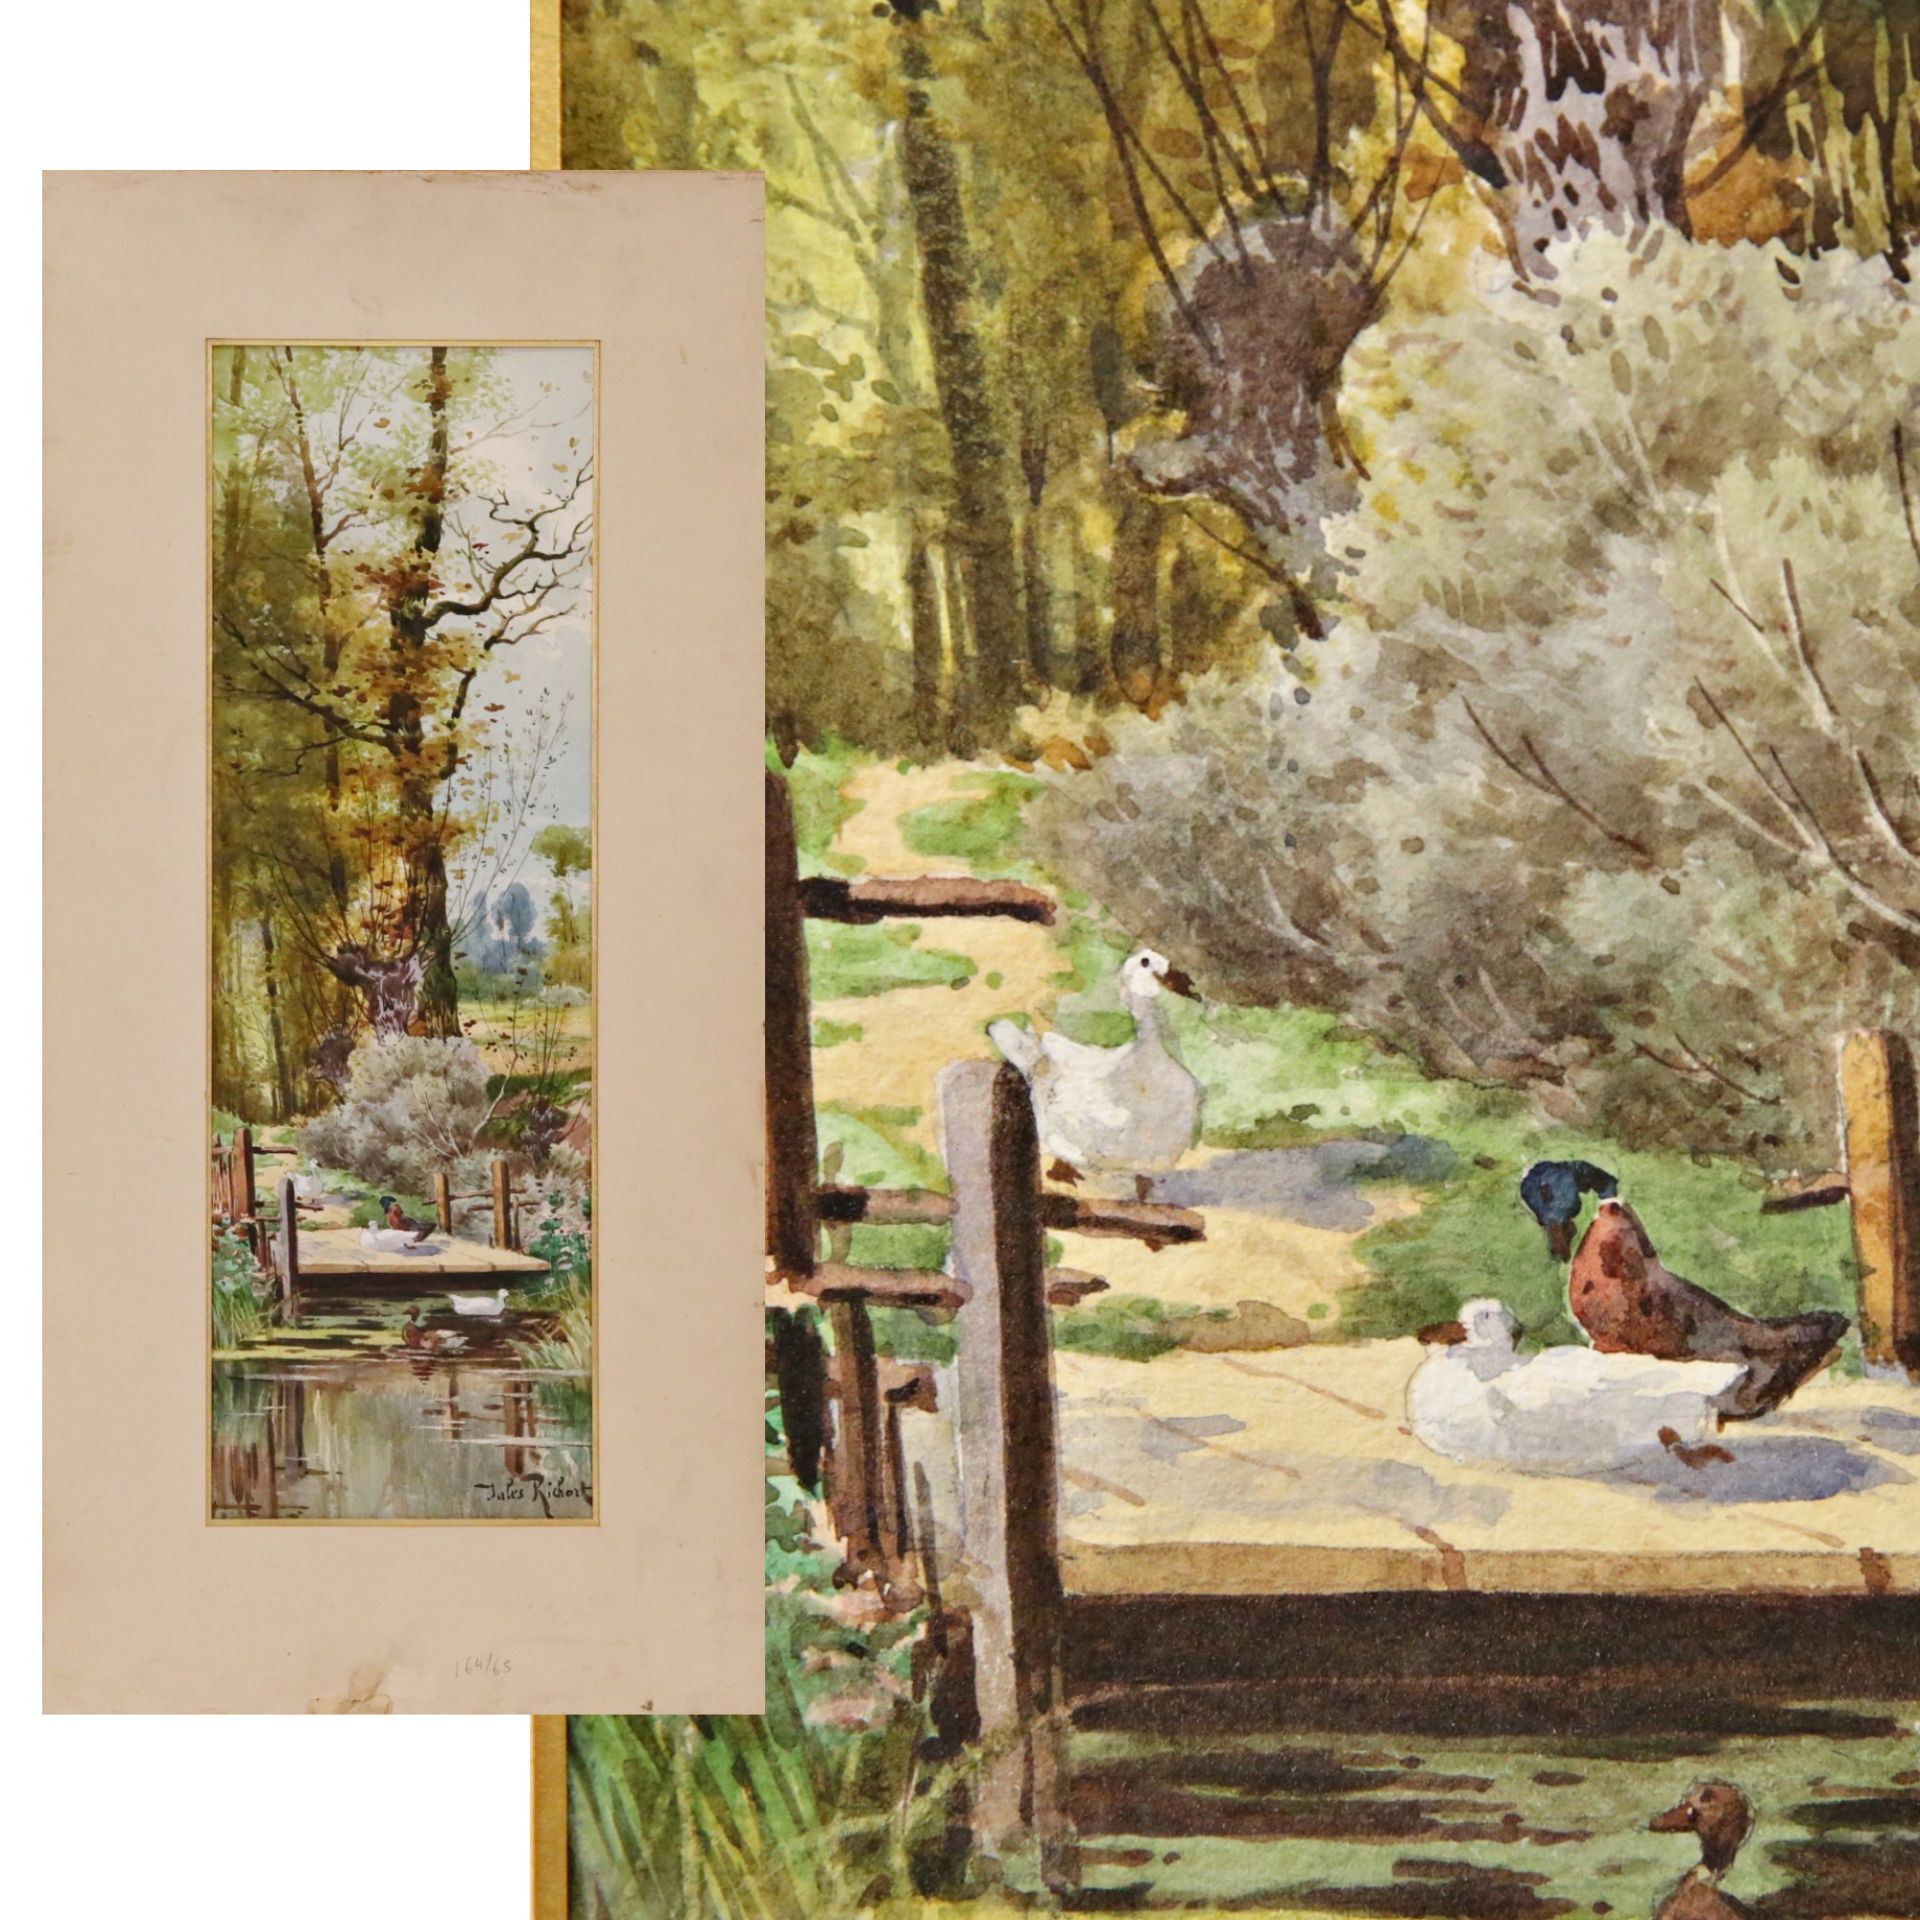 Jules RICHARD (XIX-XX) "A duck pontoon", watercolor on paper, French painting of the 19th-20th centu